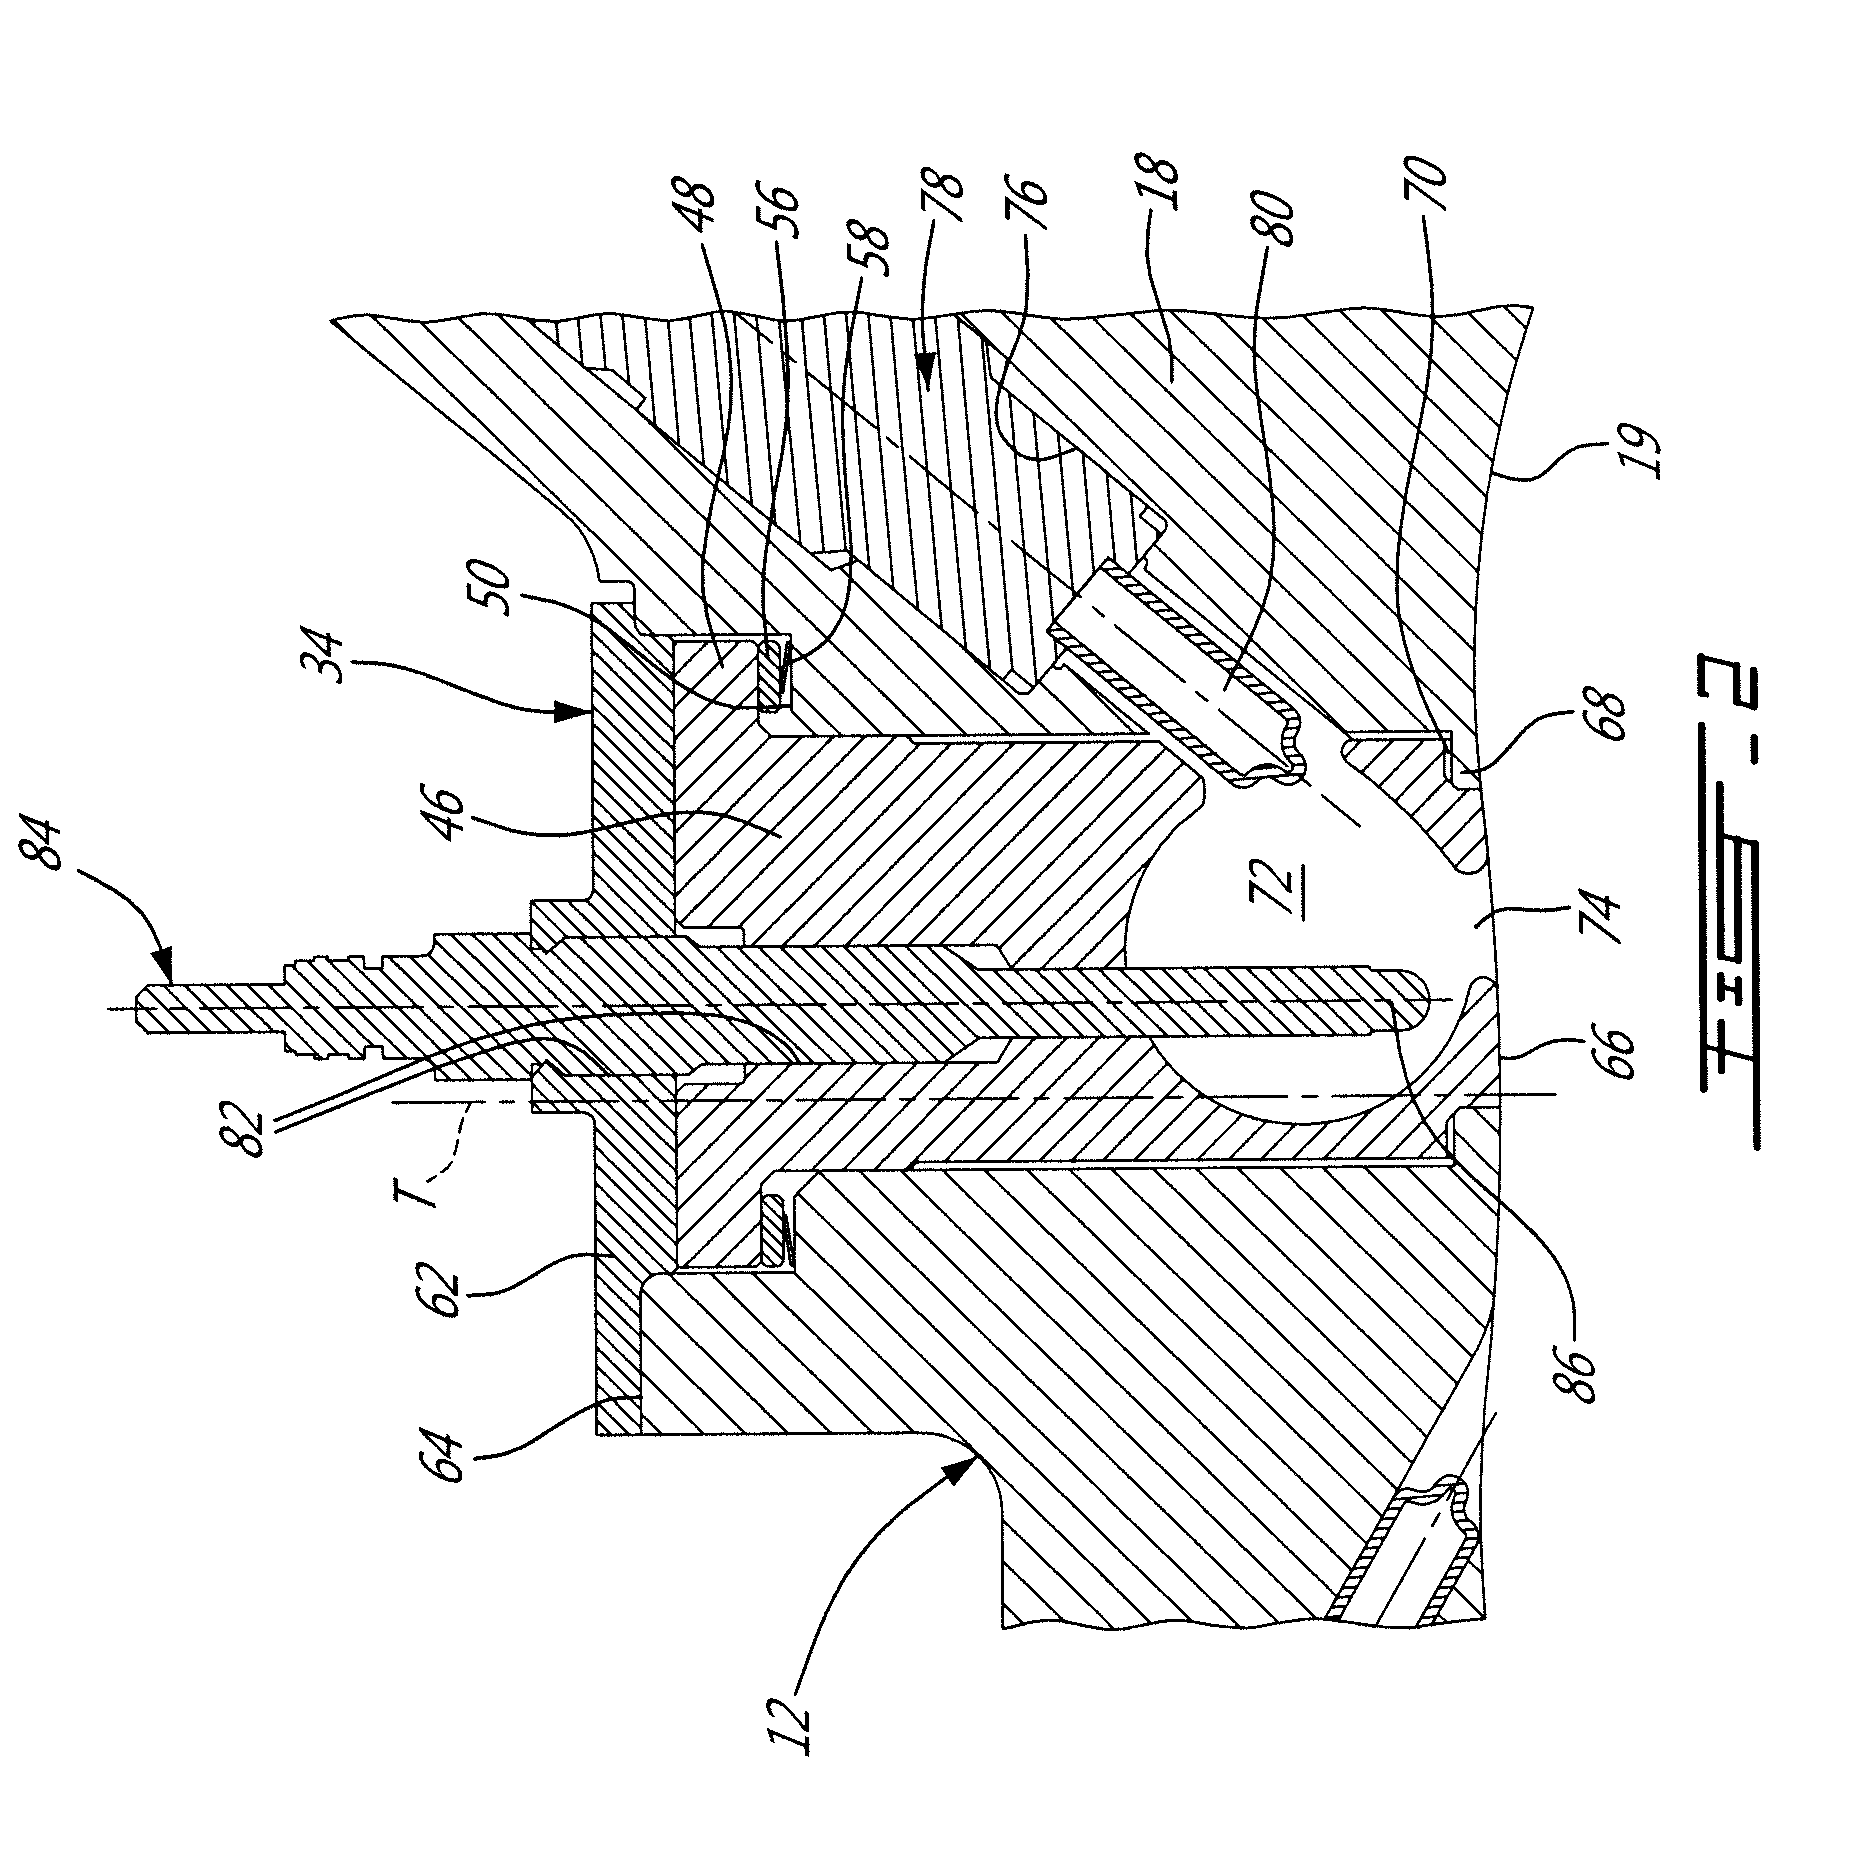 Rotary internal combustion engine with pilot subchamber